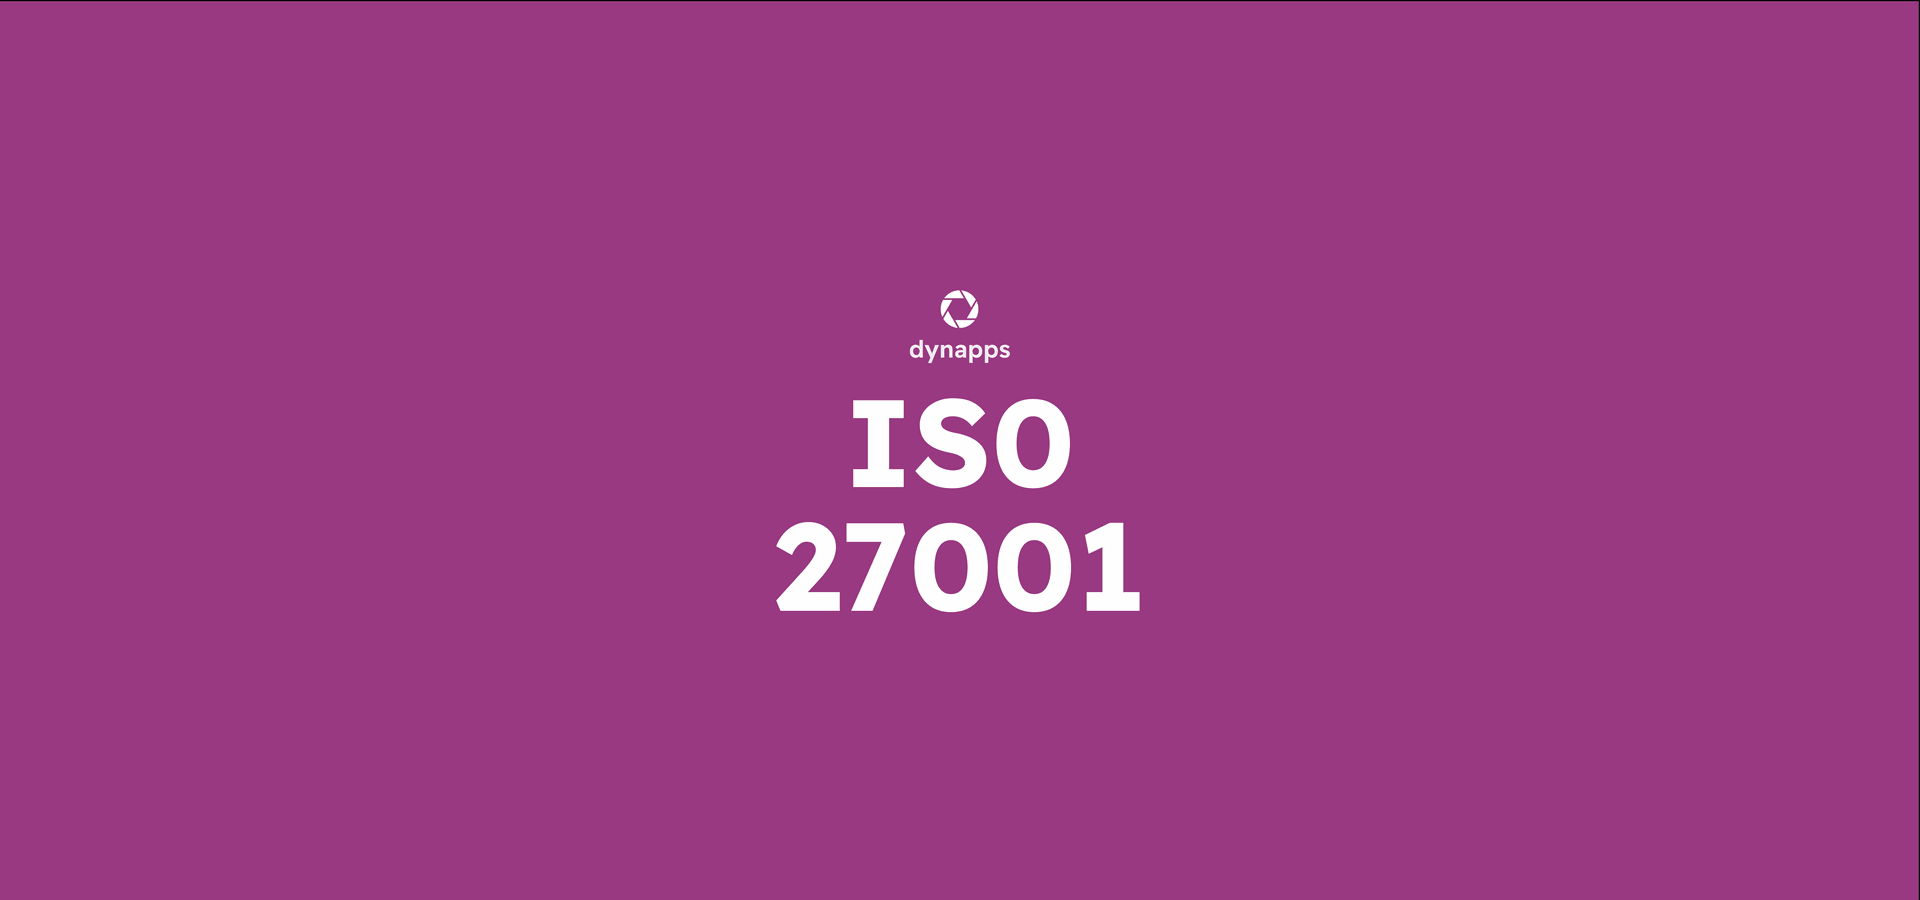 Dynapps obtains ISO 27001 certification